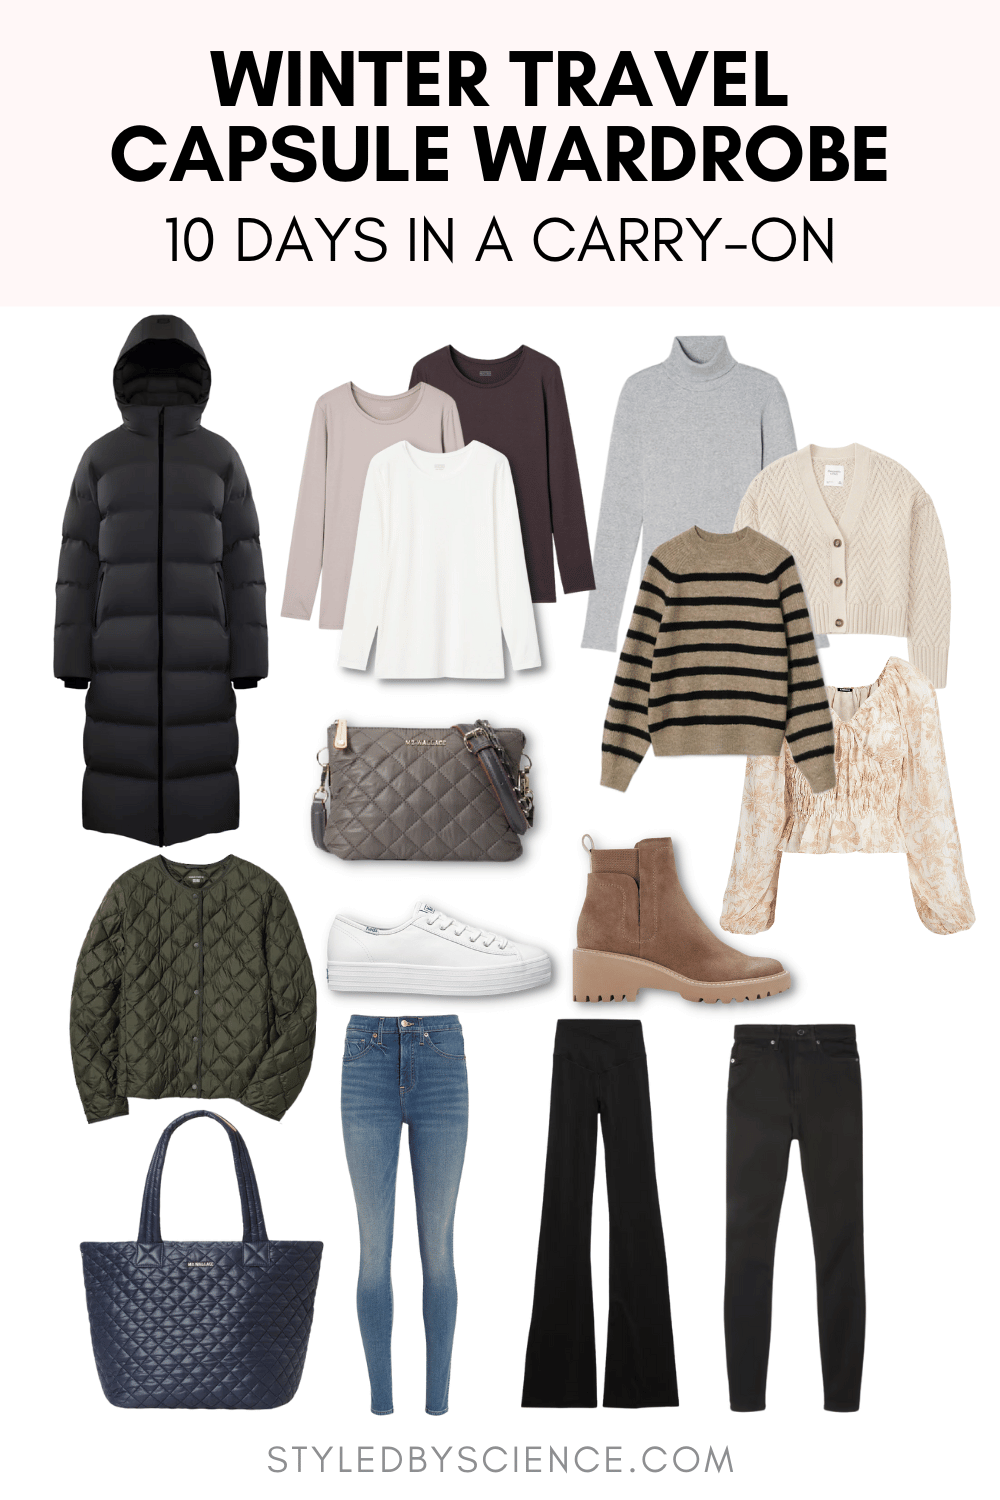 Winter Travel Capsule Wardrobe How to Pack 10 Days in a CarryOn